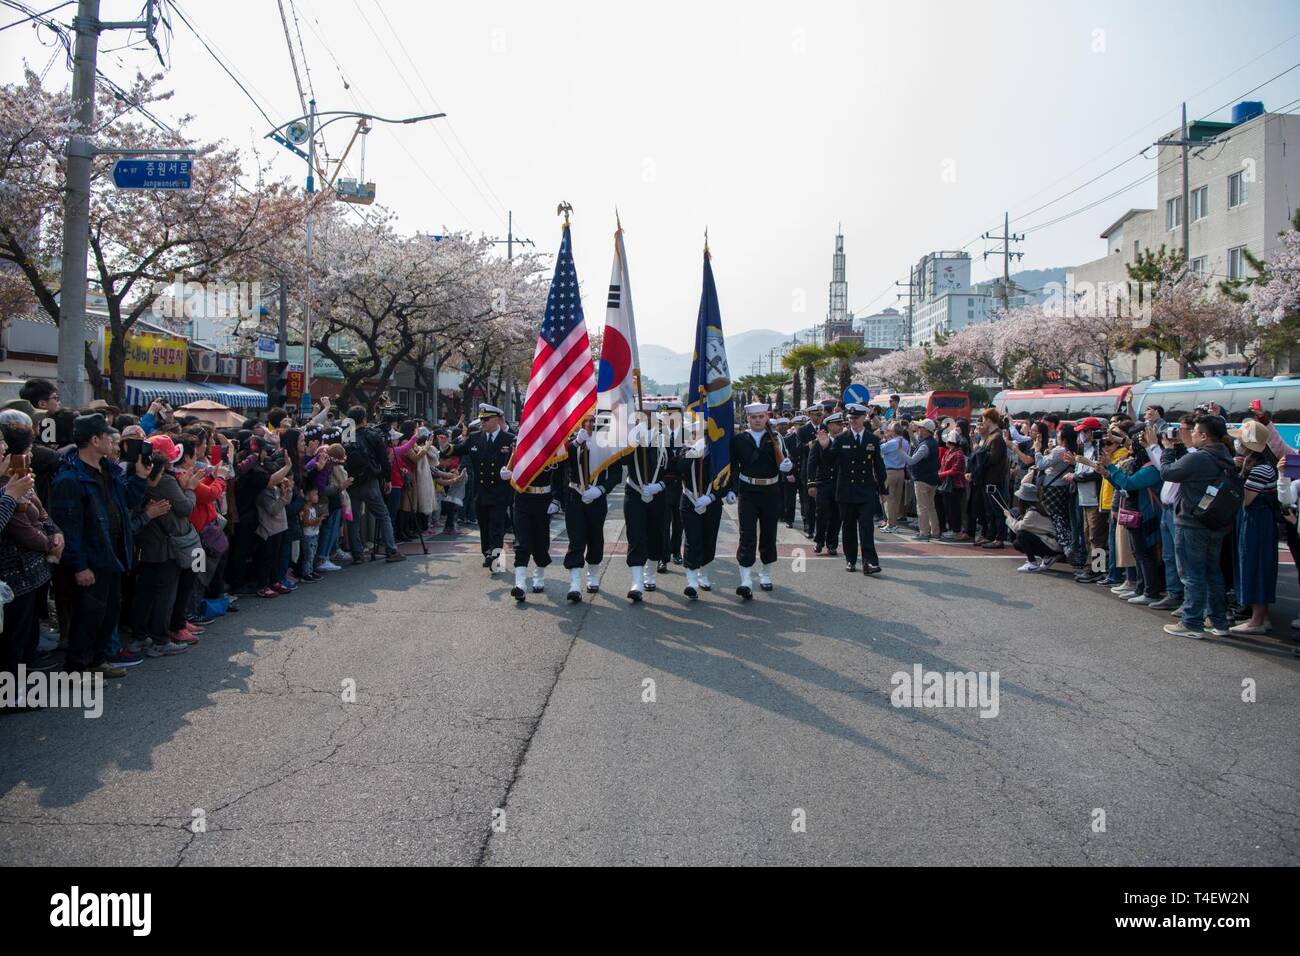 CHINHAE, Republic of Korea (April 05, 2019) Sailors assigned to Commander, Fleet Activities Chinhae (CFAC) march in the 57th annual Jinhae Gunhangje military port festival parade. The festival honors Admiral Yi Sun-sin, a great naval hero of Korea, whose victories still inform the fighting spirit of the ROK Navy. Stock Photo